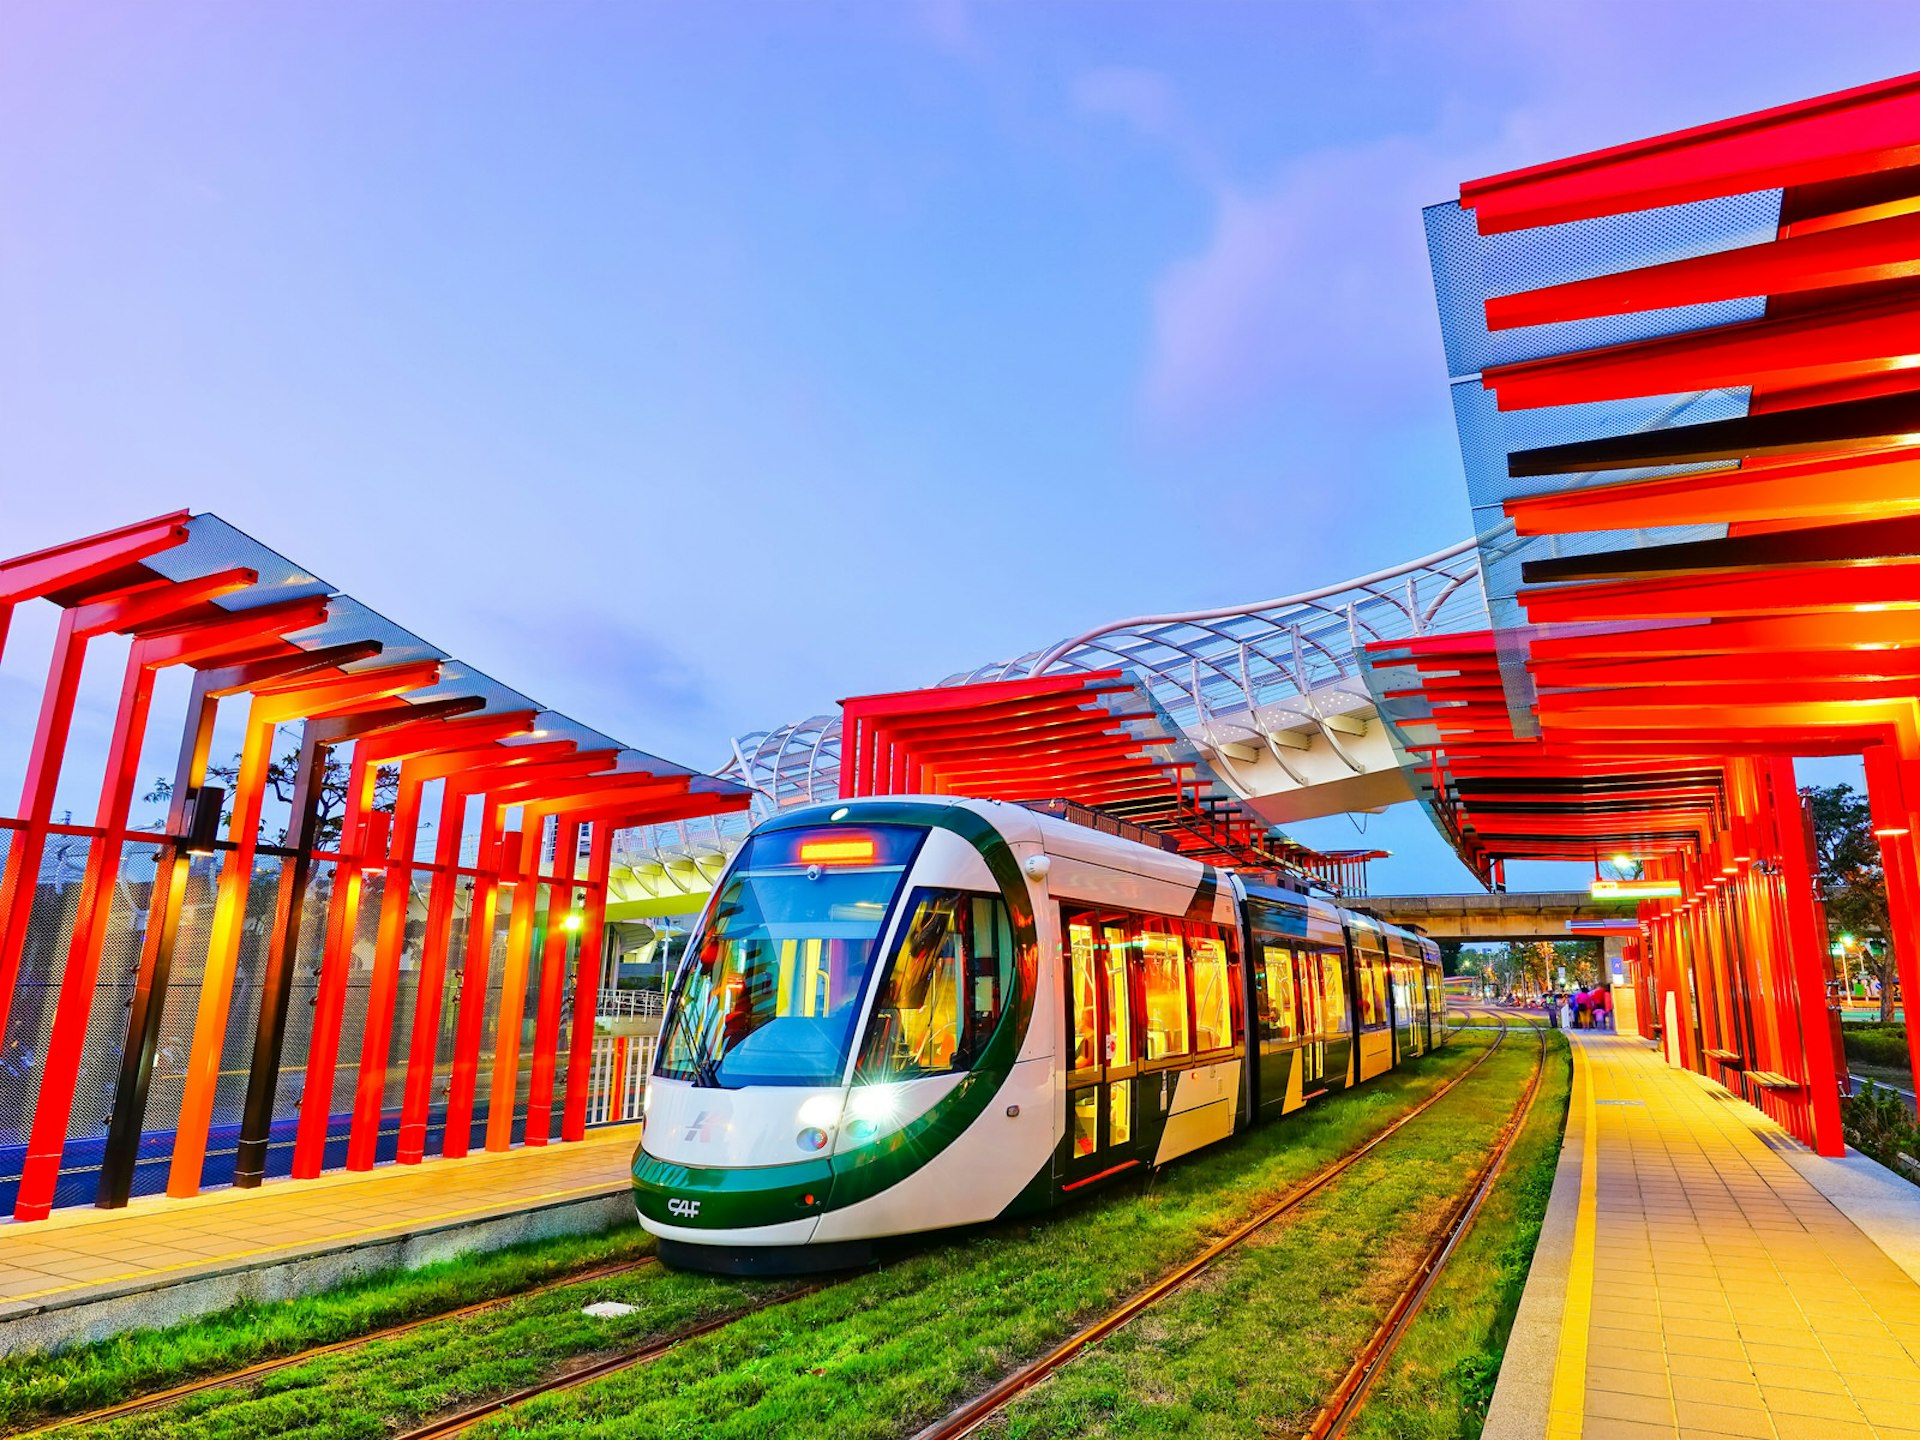 The city's new light rail system will connect the major cultural sights © Javen / Shutterstock